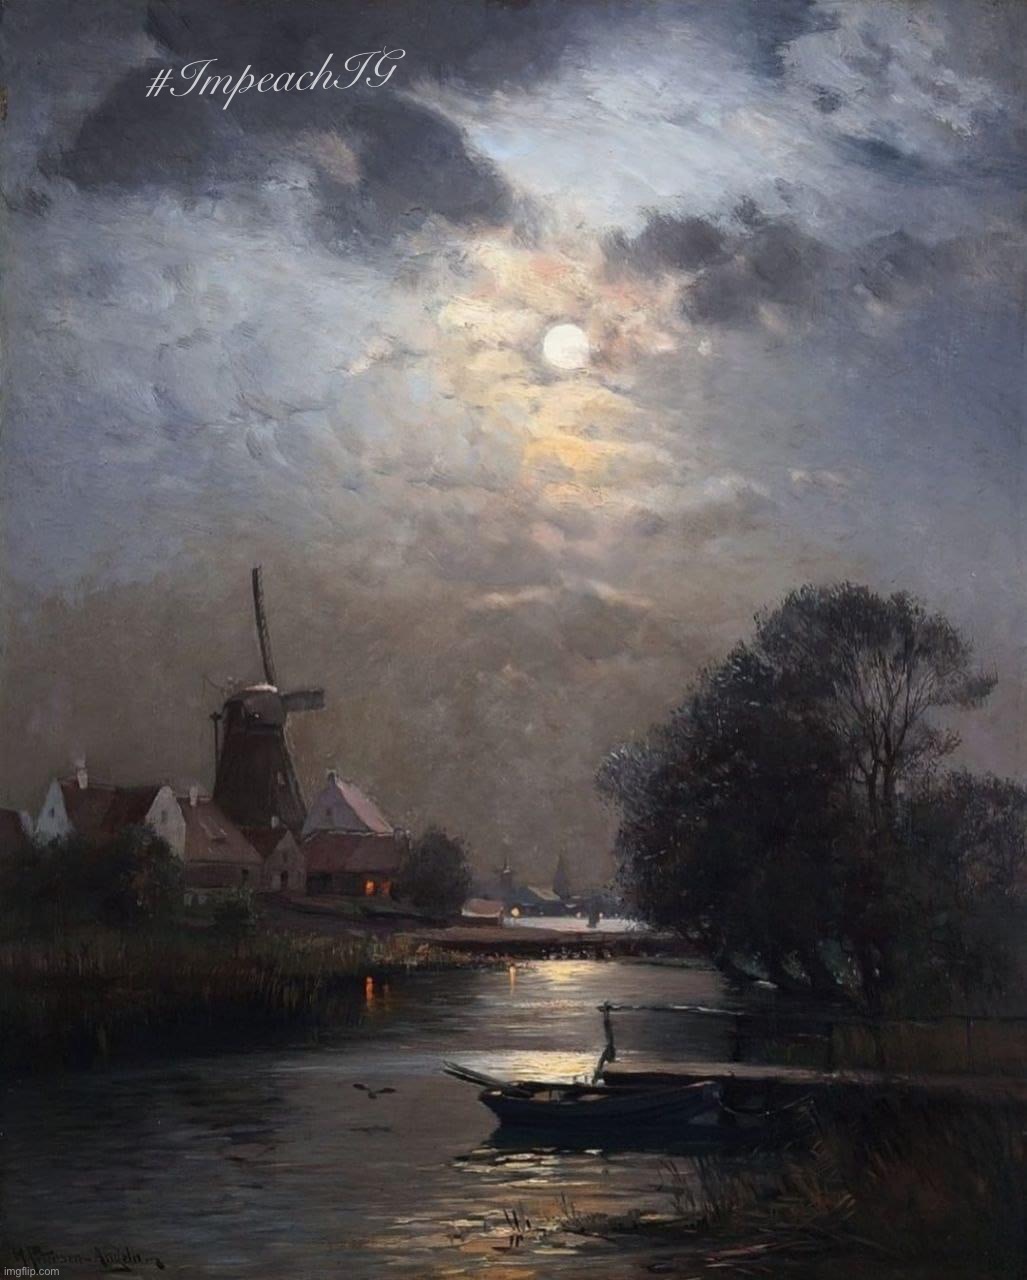 By Heinrich Petersen Angeln, 1850 - 1906Dutch landscape by Moonlight #oilpainting #painting #artwork #impeachig | #ImpeachIG | image tagged in watercolor painting by heinrich petersen angeln,oilpainting,painting,artwork,impeach,ig | made w/ Imgflip meme maker